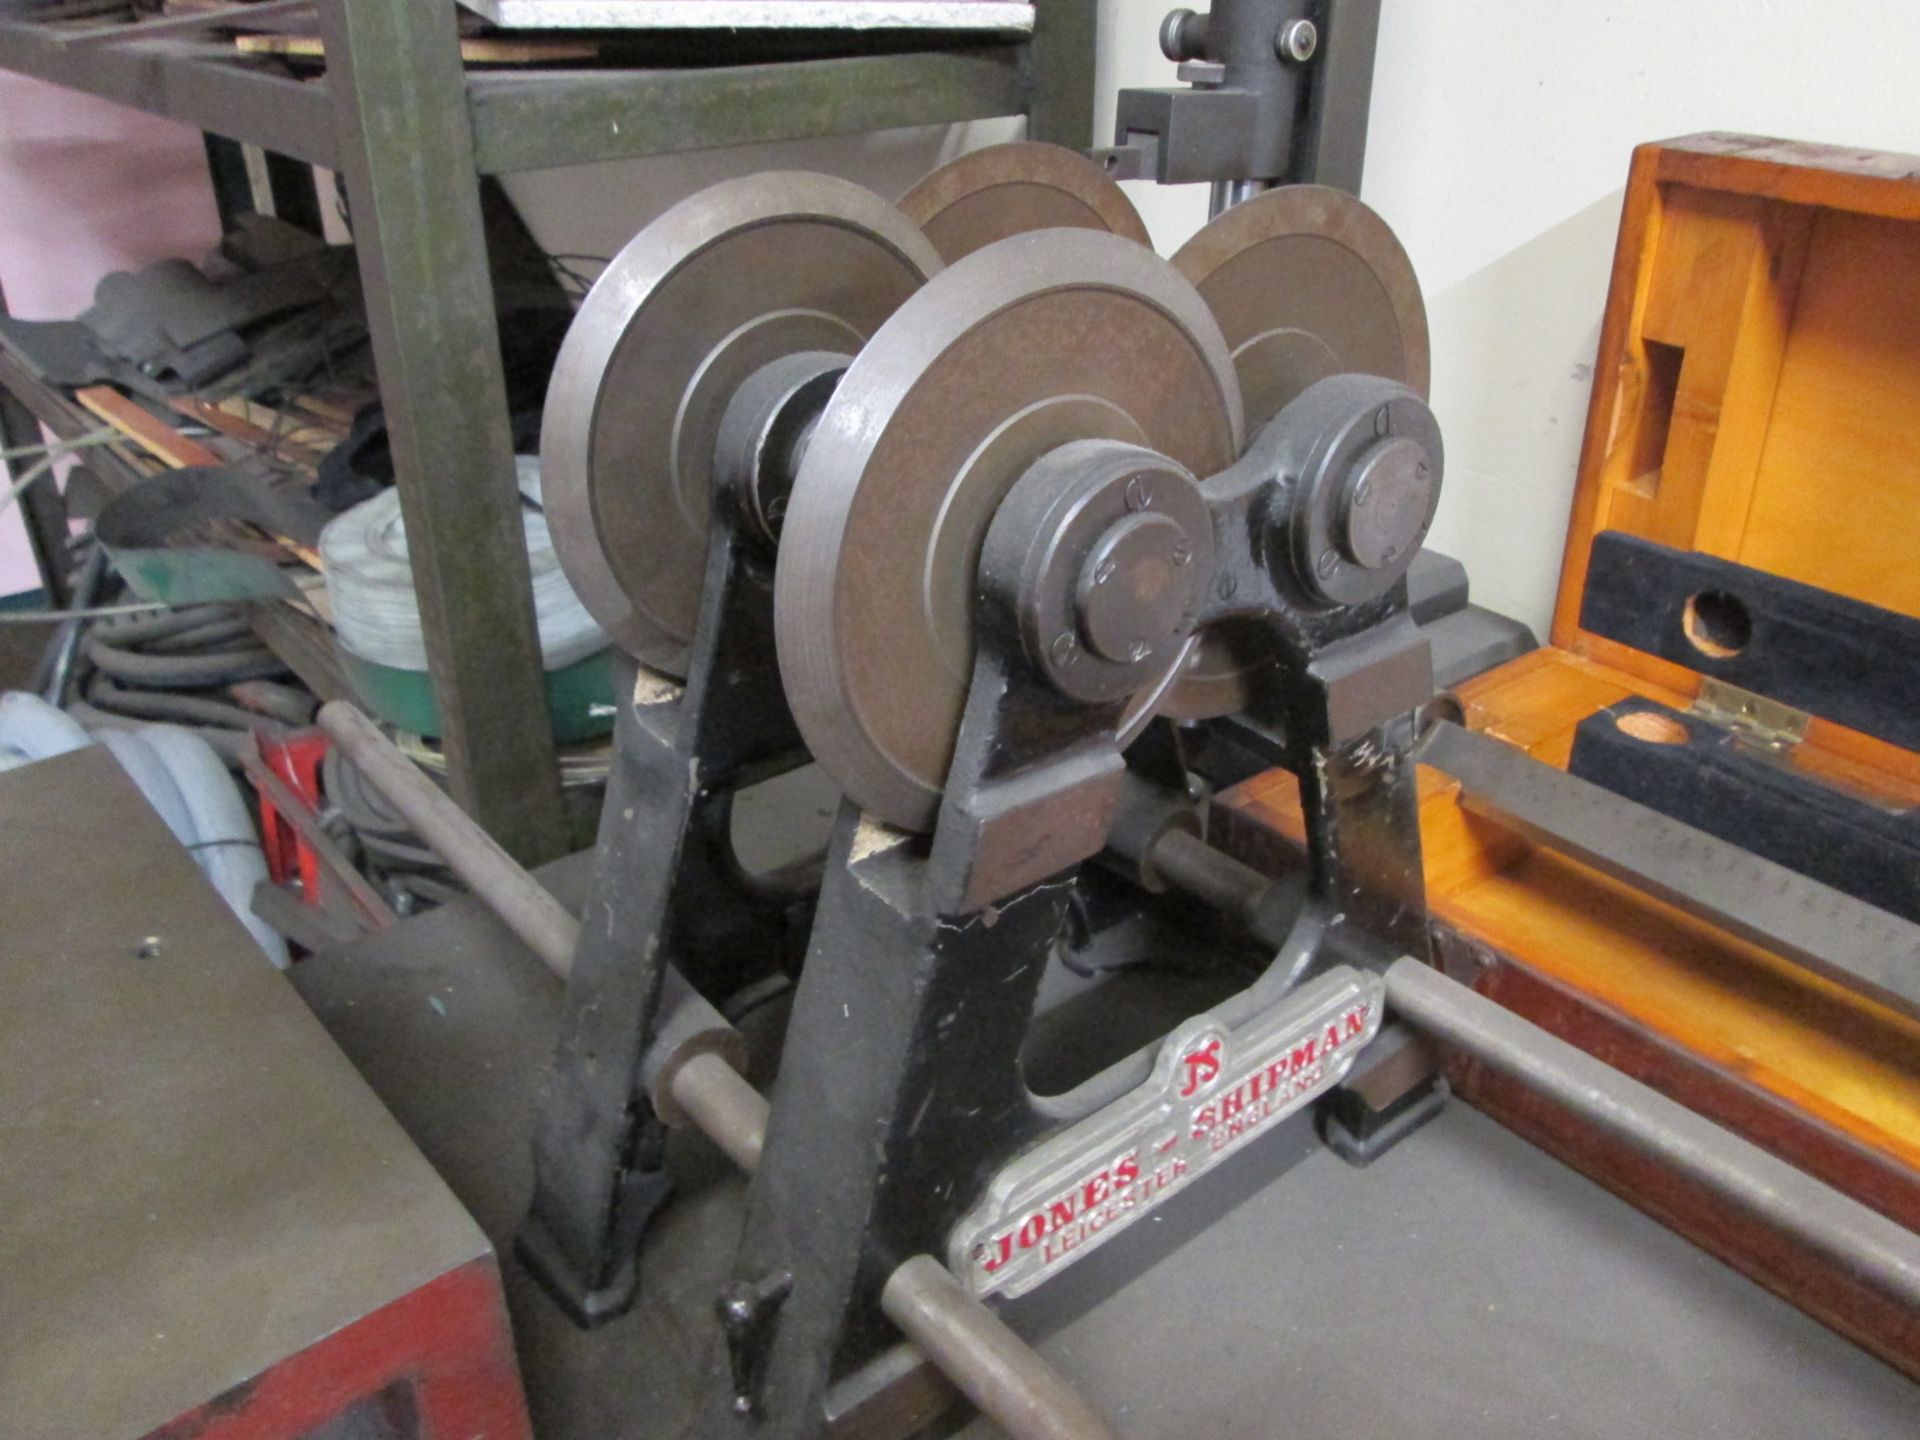 Inspection Equipment, To include 1000 mm height gauge, J&S wheel balancer, 600 mm bench centres, - Image 6 of 9